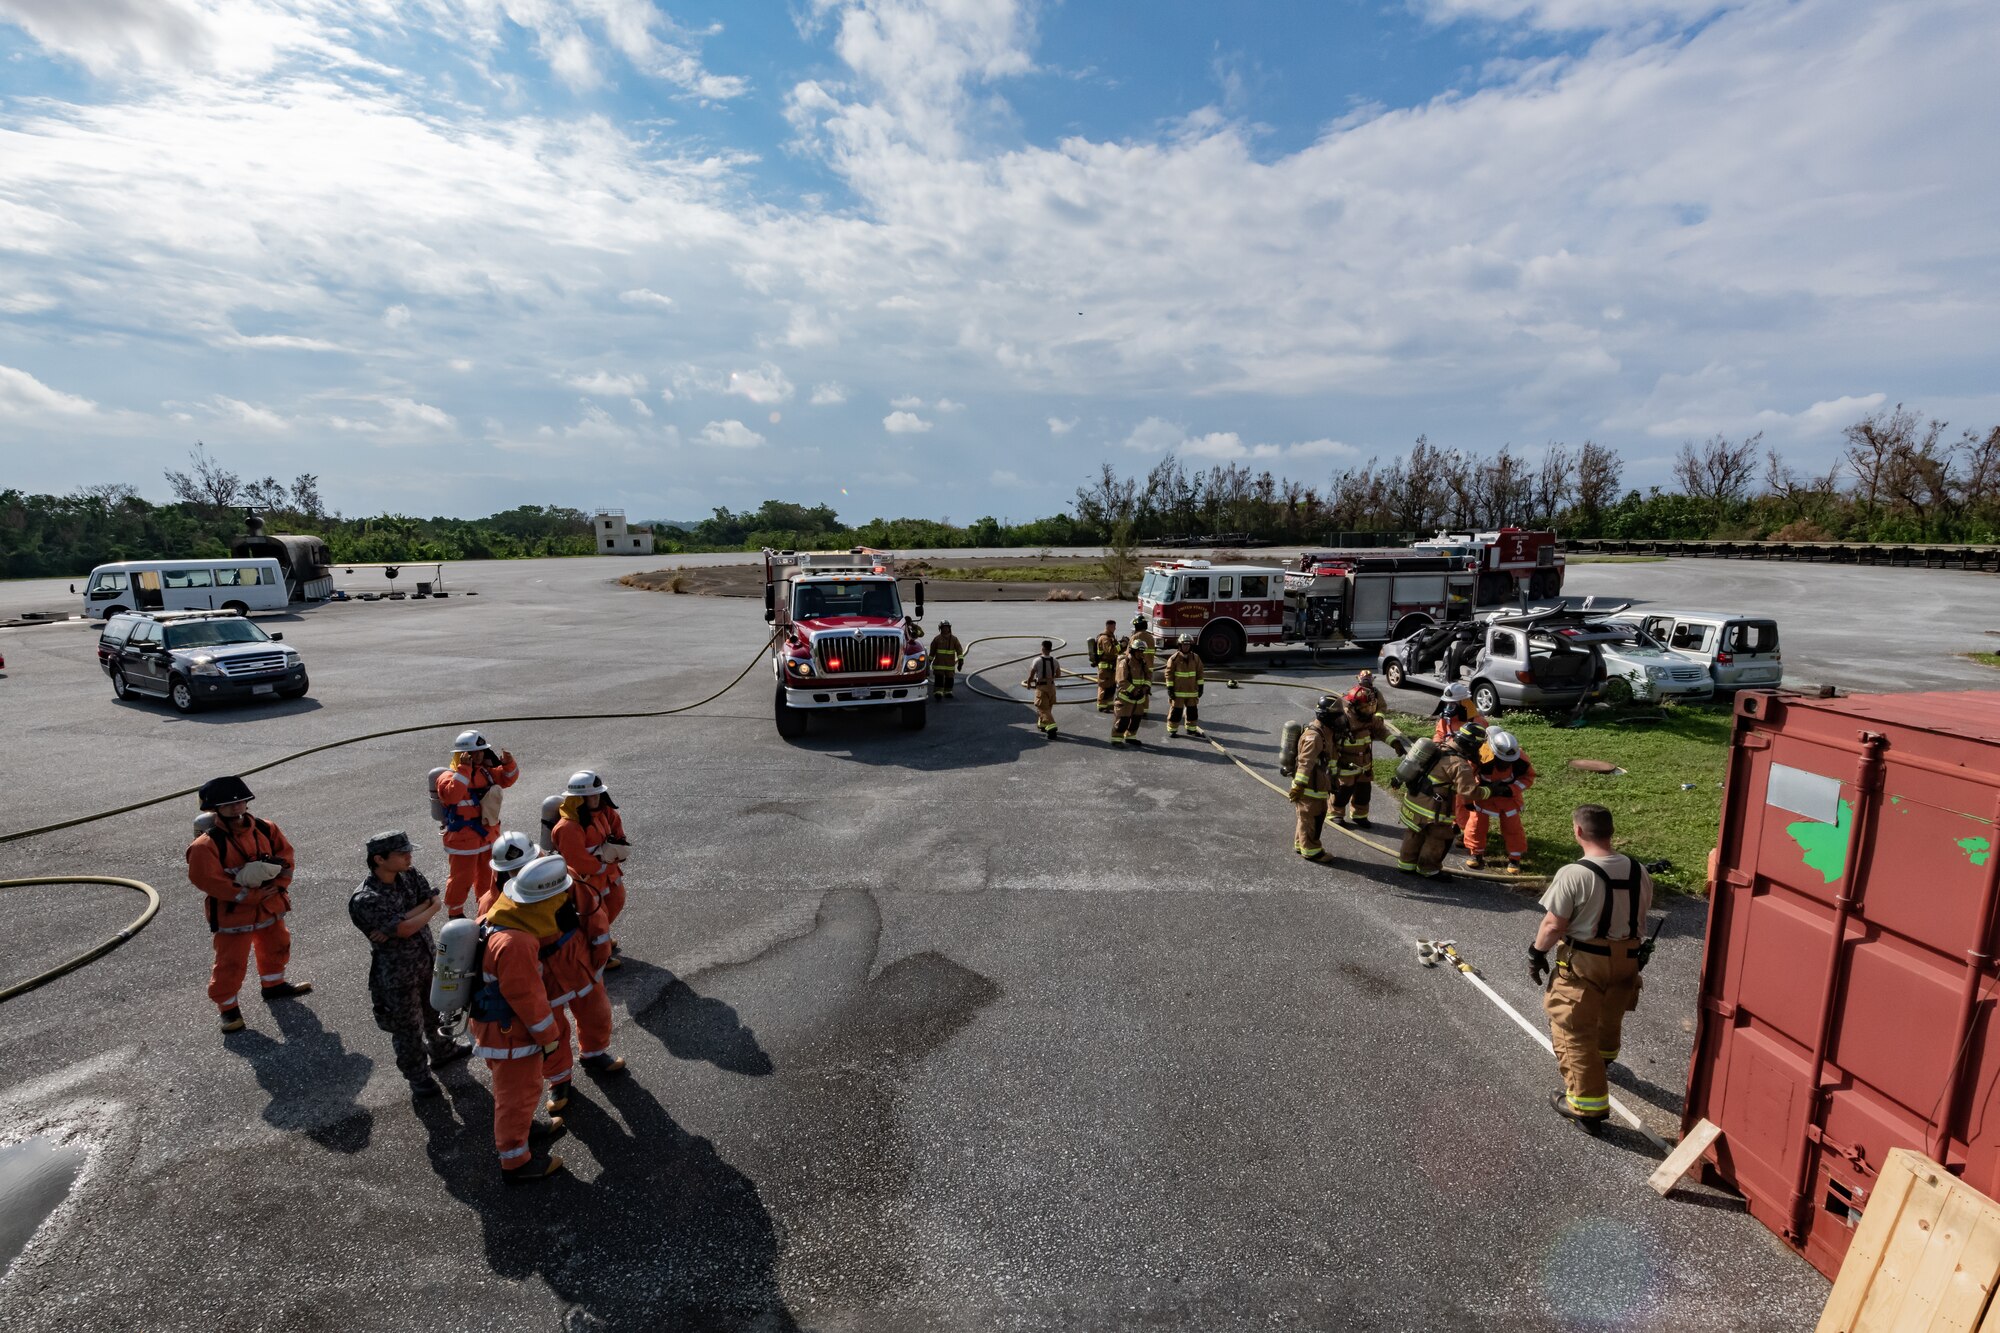 U.S. Air Force firefighters from the 18th Civil Engineer Squadron and Japan Air Self Defense Force firefighters from the 9th Wing, Naha Air Base, Japan, conduct structural live fire training Nov. 15, 2018, at Kadena Air Base, Japan. Firefighters conduct training regularly to maintain constant readiness for emergencies. (U.S. Air Force photo by Staff Sgt. Micaiah Anthony)